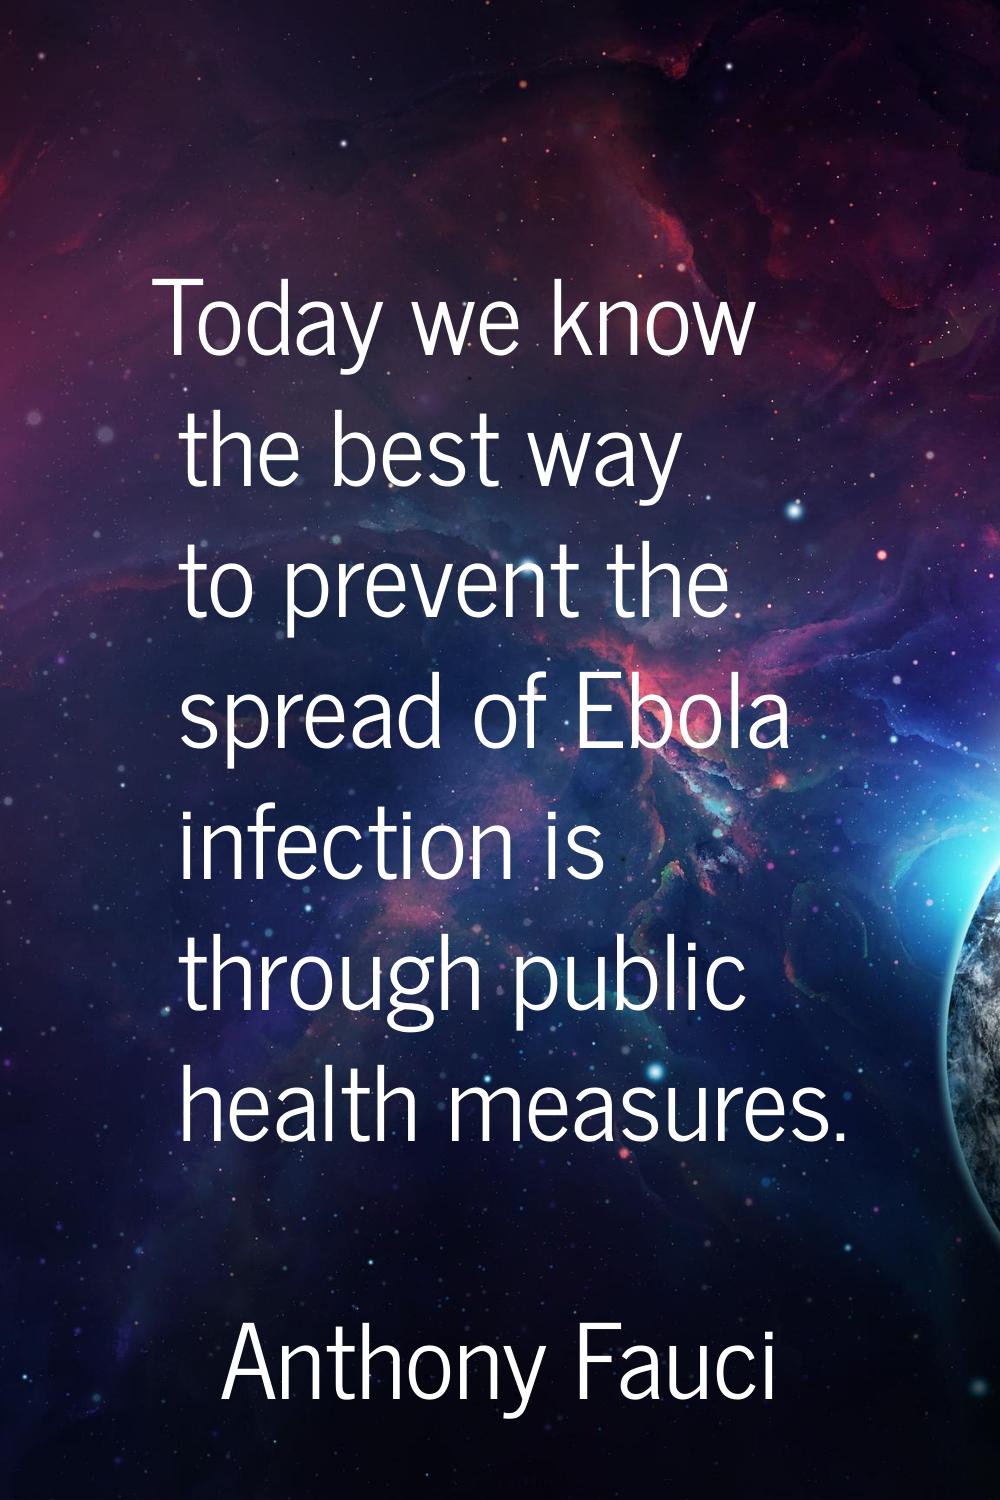 Today we know the best way to prevent the spread of Ebola infection is through public health measur